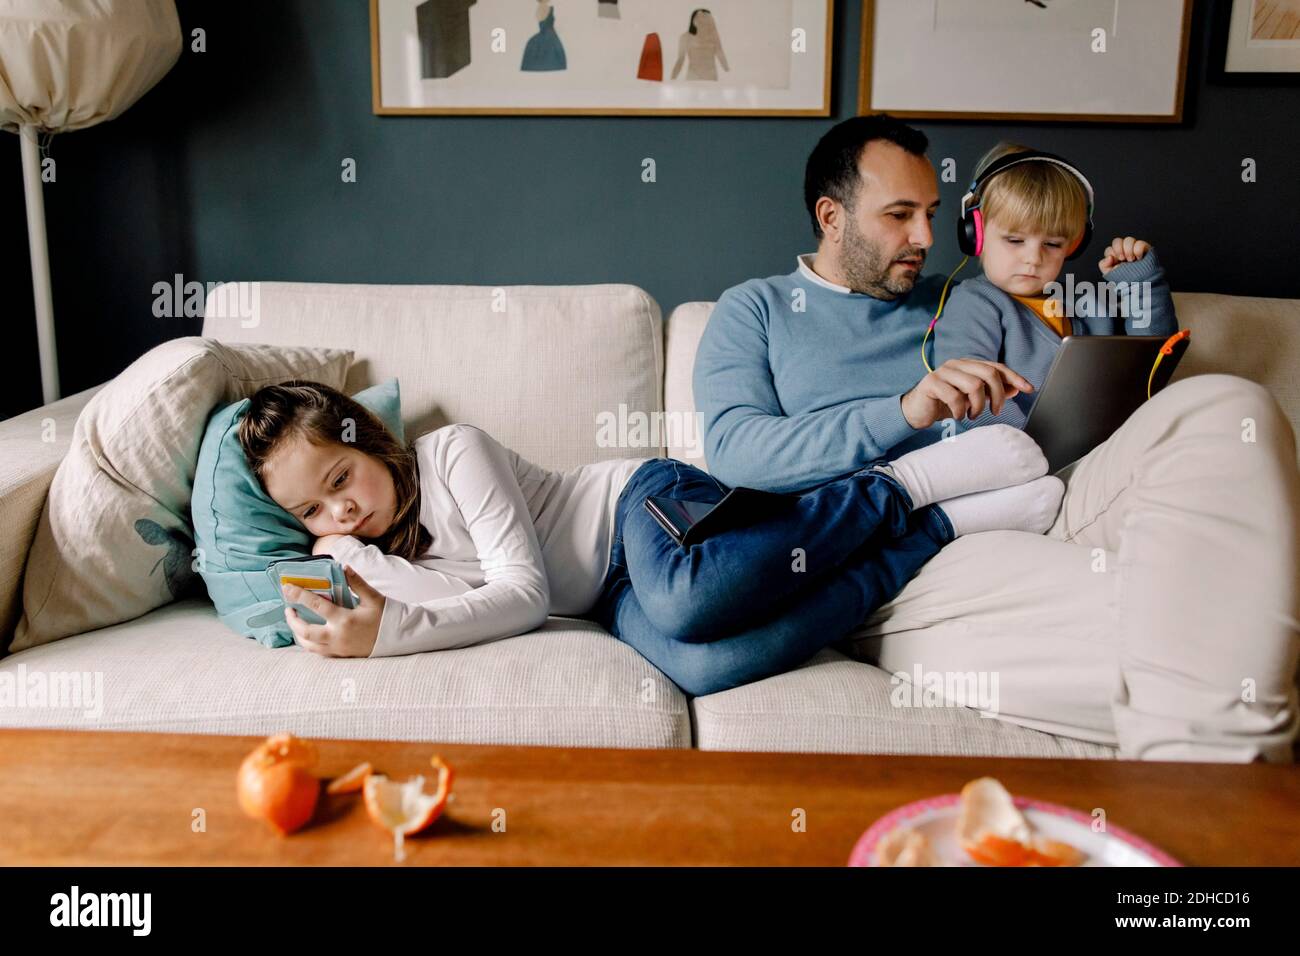 Girl using mobile phone while father showing digital tablet to sister on couch in living room at home Stock Photo